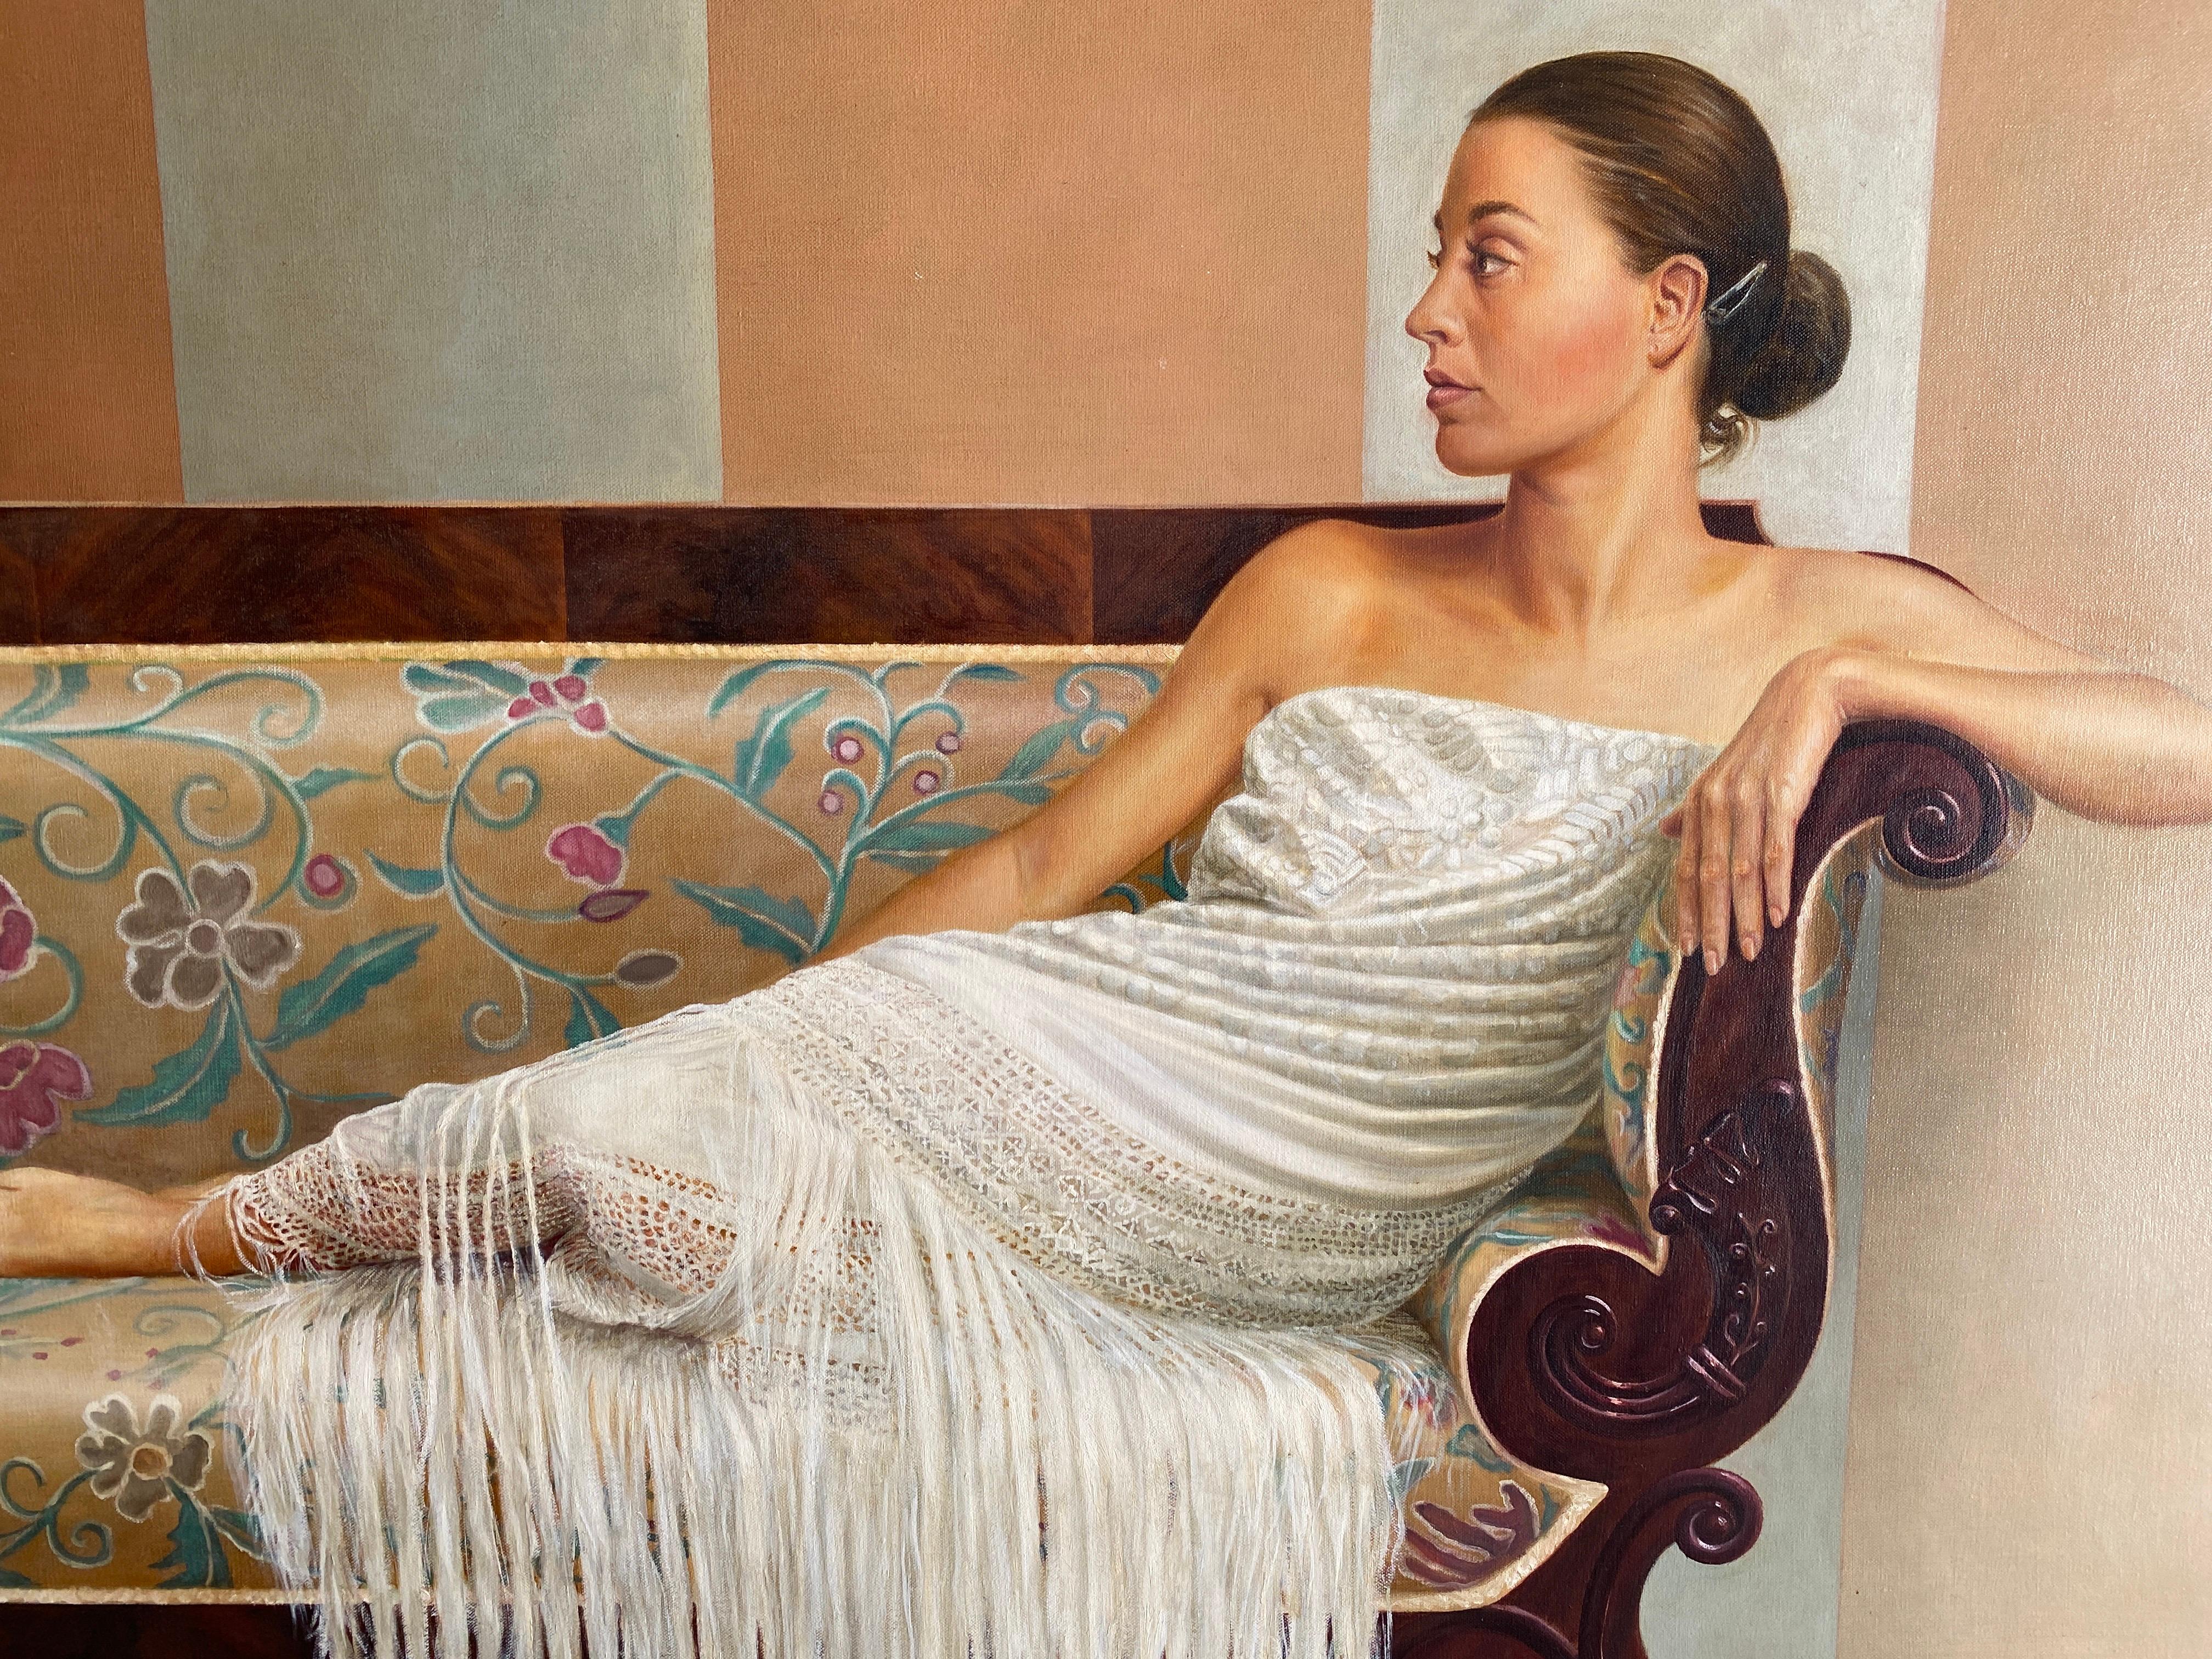 Serenity (Serenidad). Spanish Contemporary Figurative Realism. Oil on canvas For Sale 1